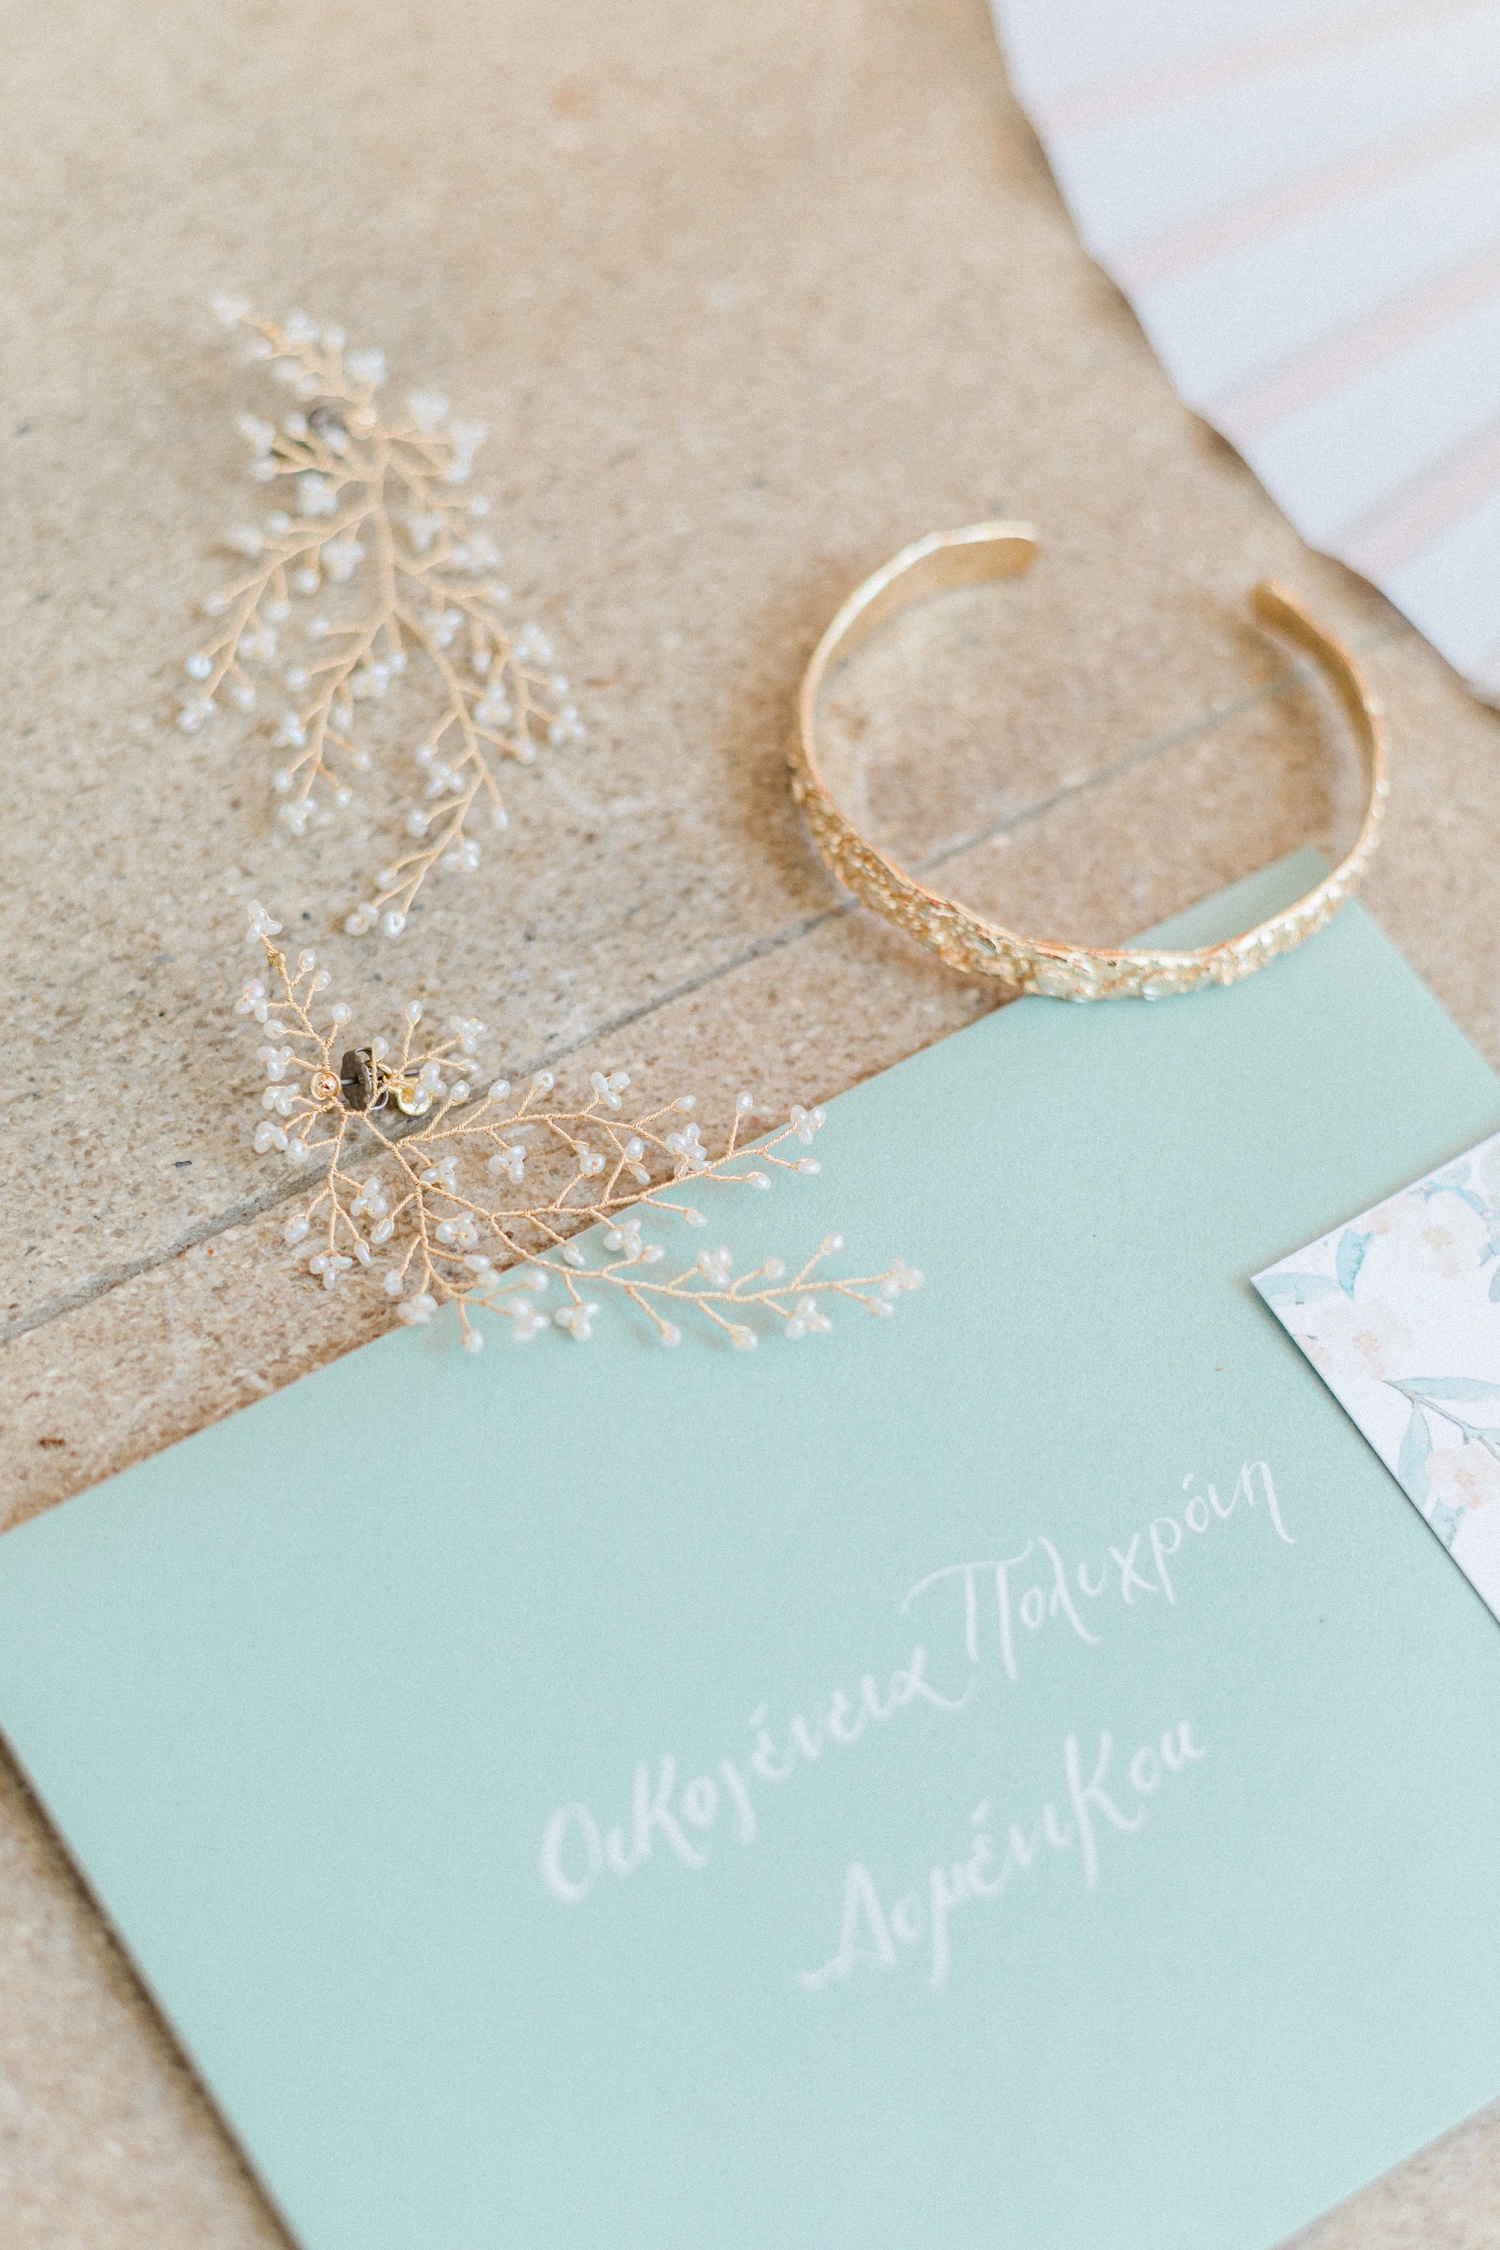 Bridal details including mint envelope with white calligraphy and gold jewellery